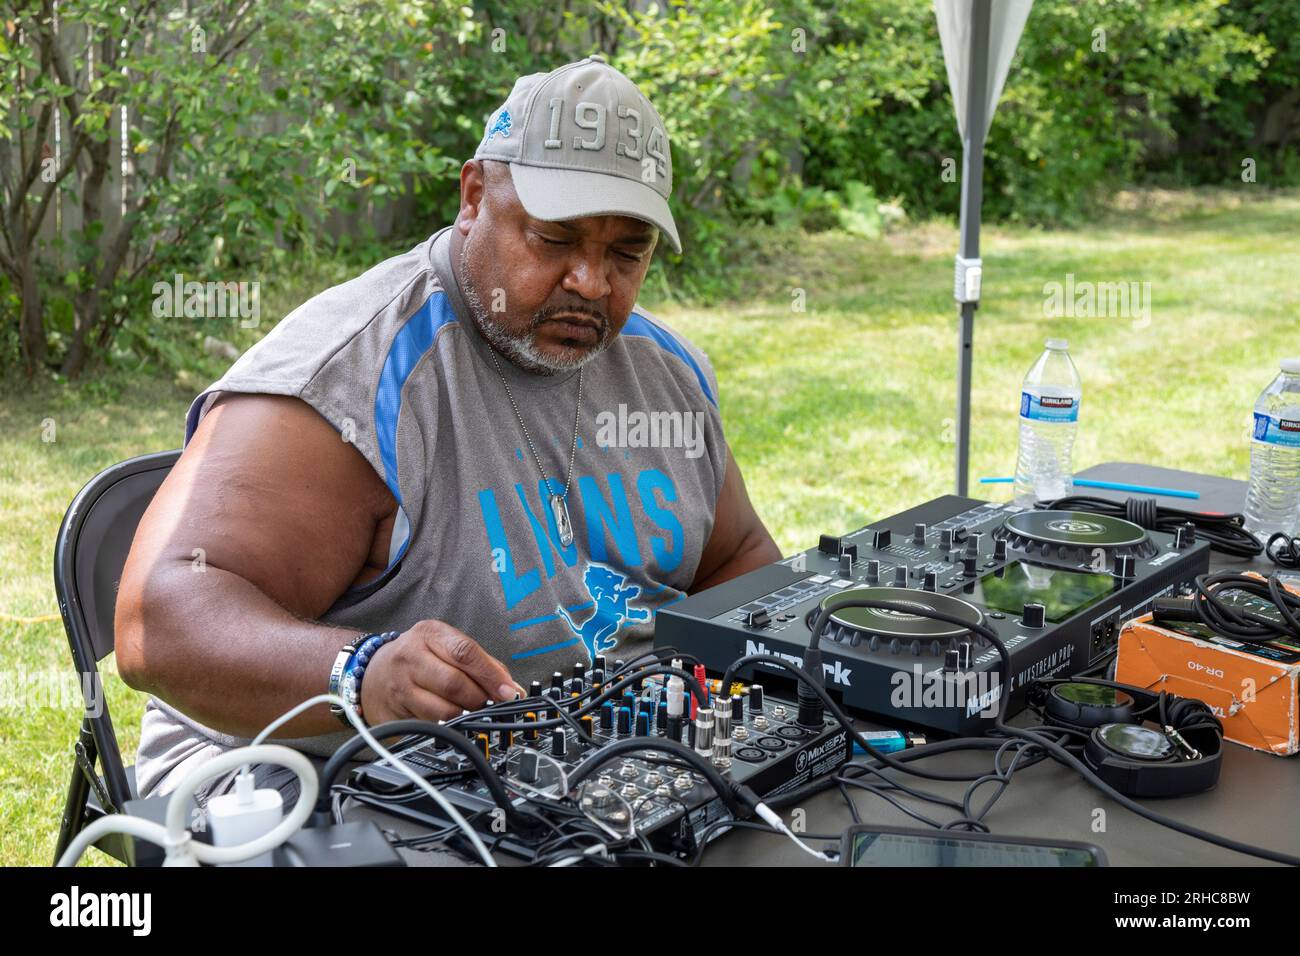 Detroit, Michigan - High school principal Marty Bulger is the DJ as residents of the Morningside neighborhood dance the Hustle while enjoying a picnic Stock Photo